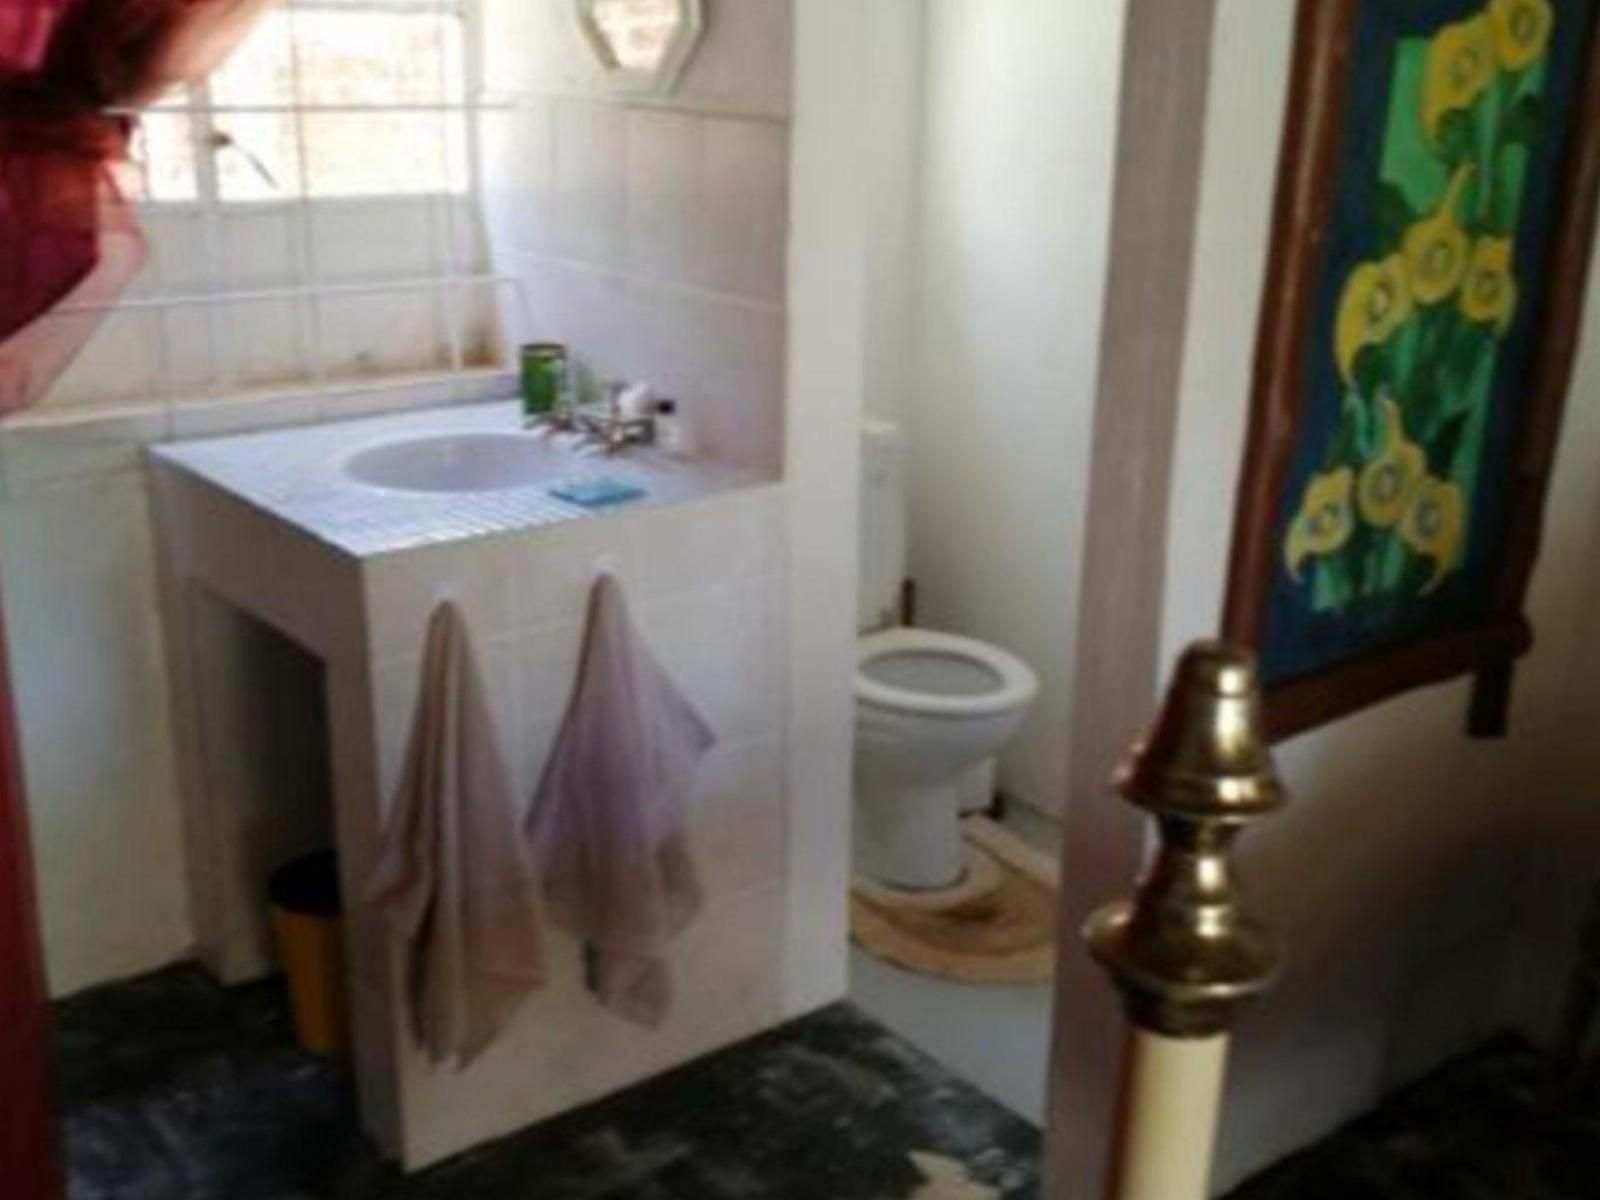 Copperwing Haenertsburg Limpopo Province South Africa Bathroom